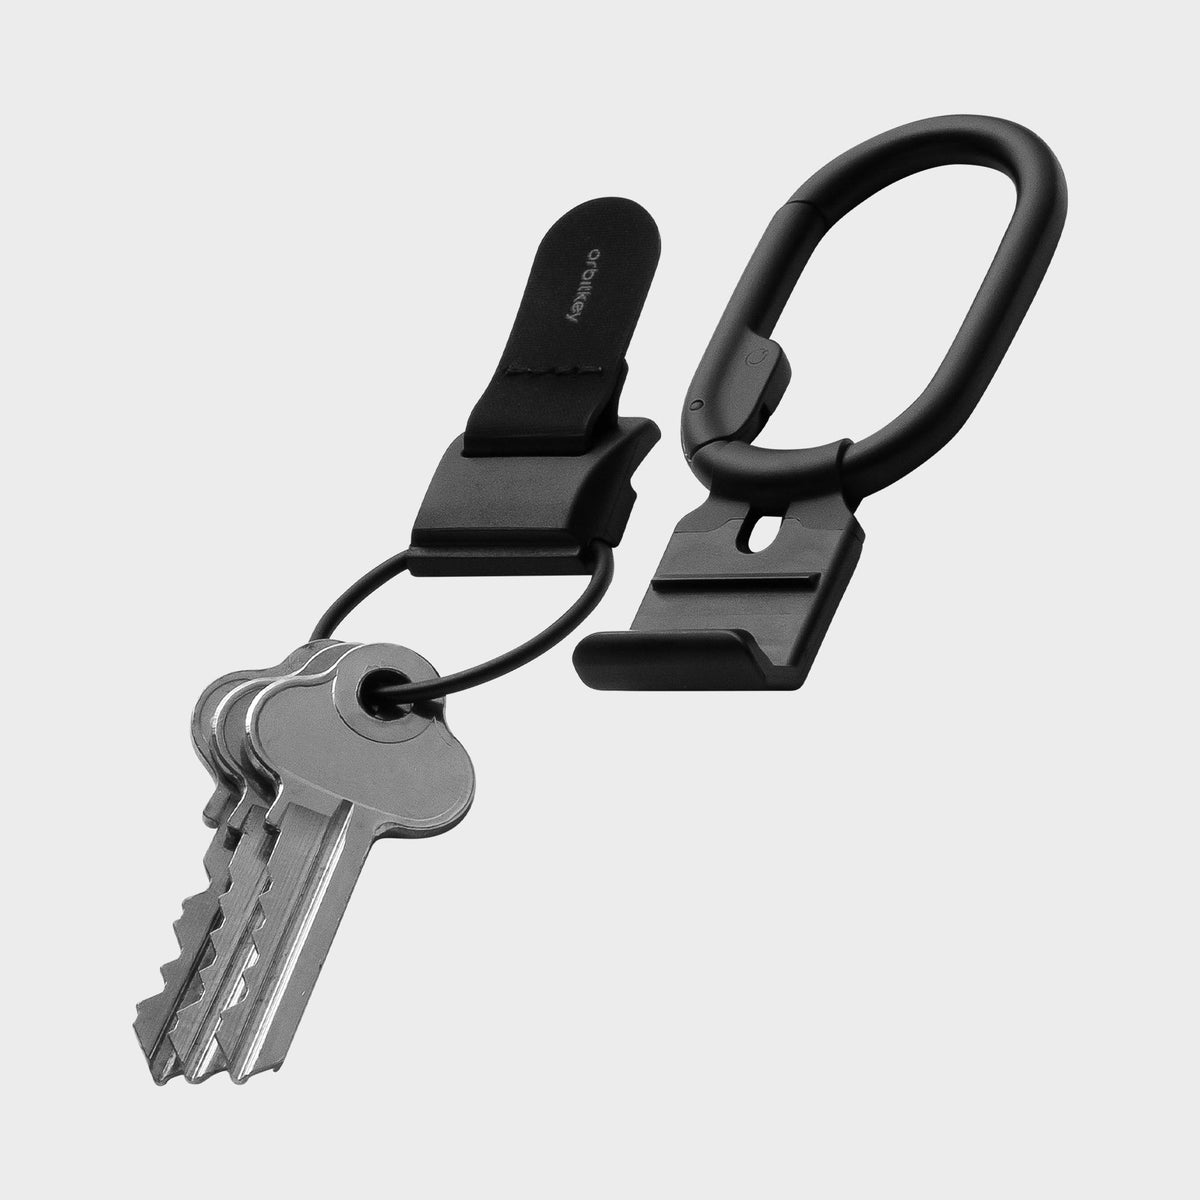 The Free Key - A better keyring? - Carryology